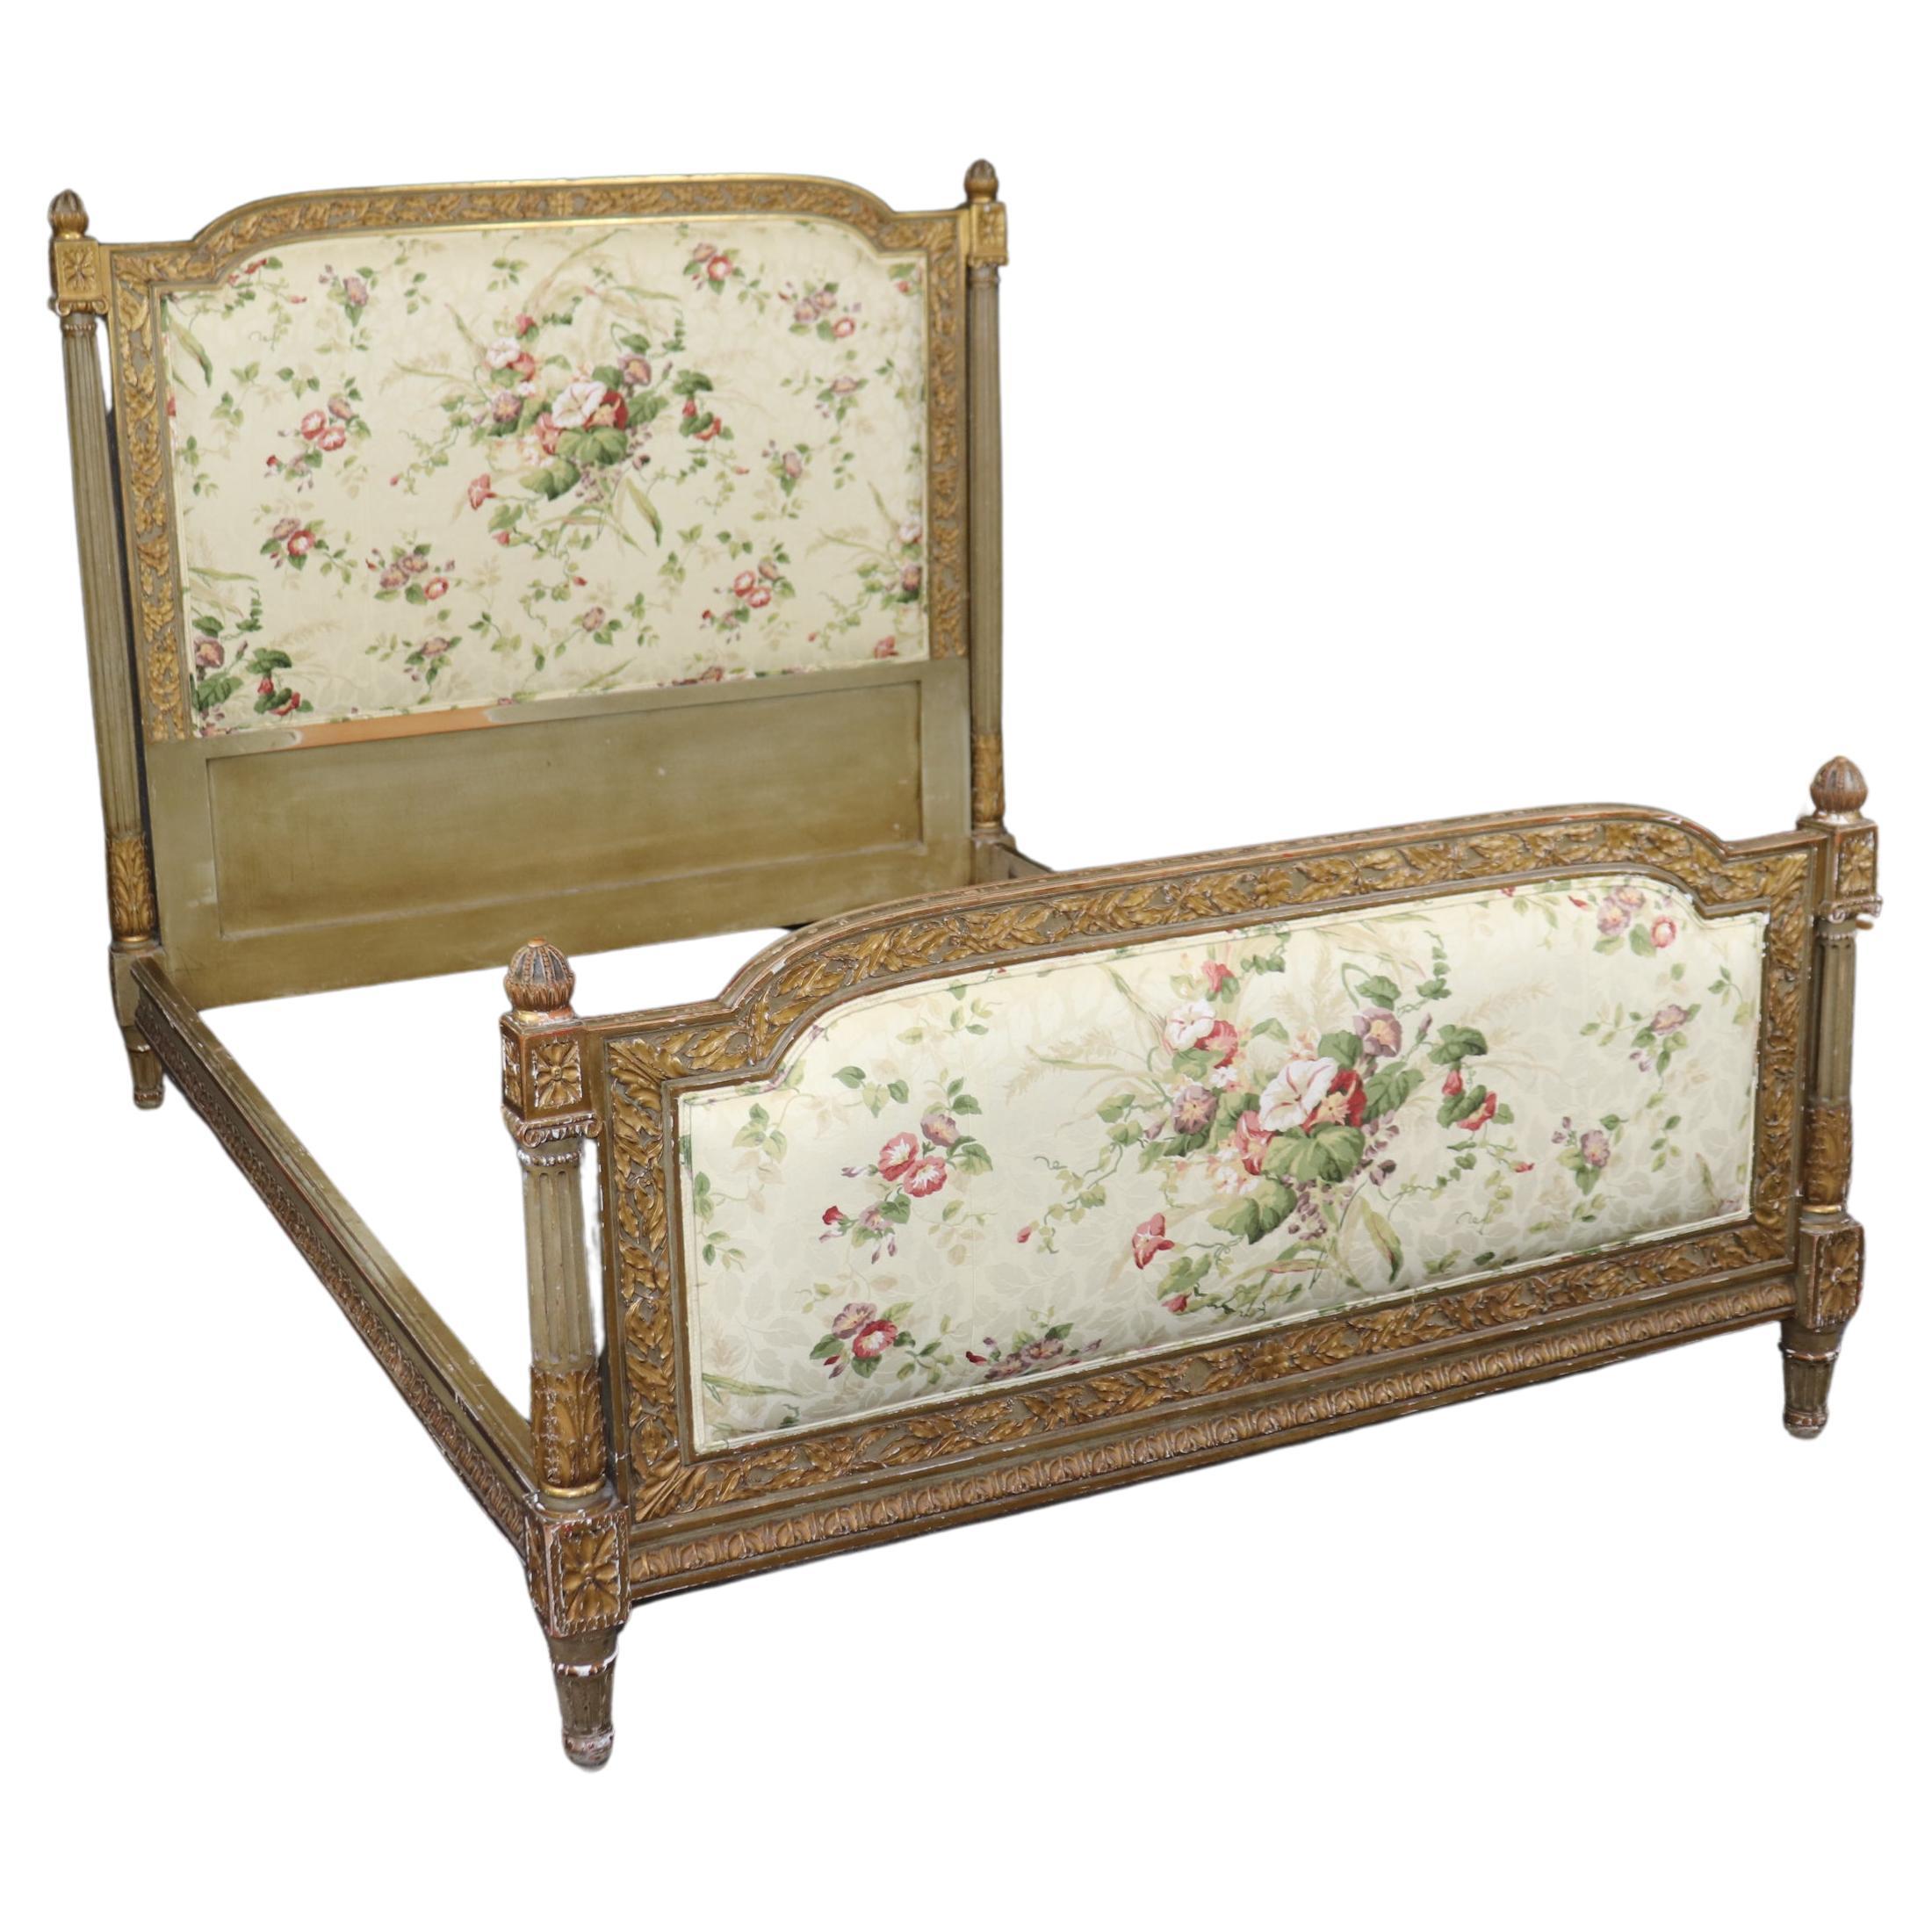 Fantastic Genuine Gilt French Louis XVI Tall Upholstered Full Double Size Bed For Sale